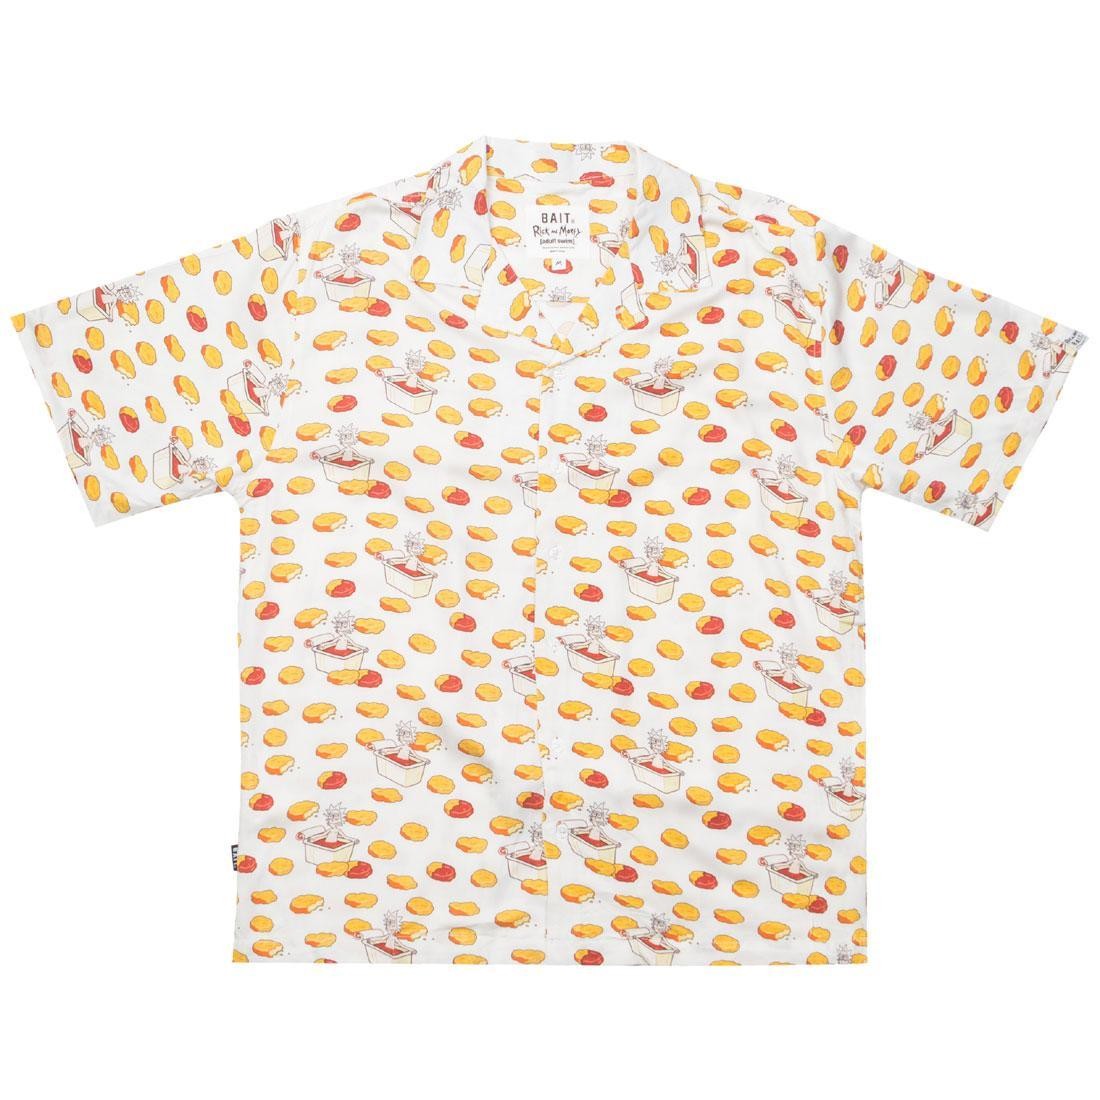 BAIT x Rick And Morty Men Chicken Nugget Hawaiian Button Up white nuggets